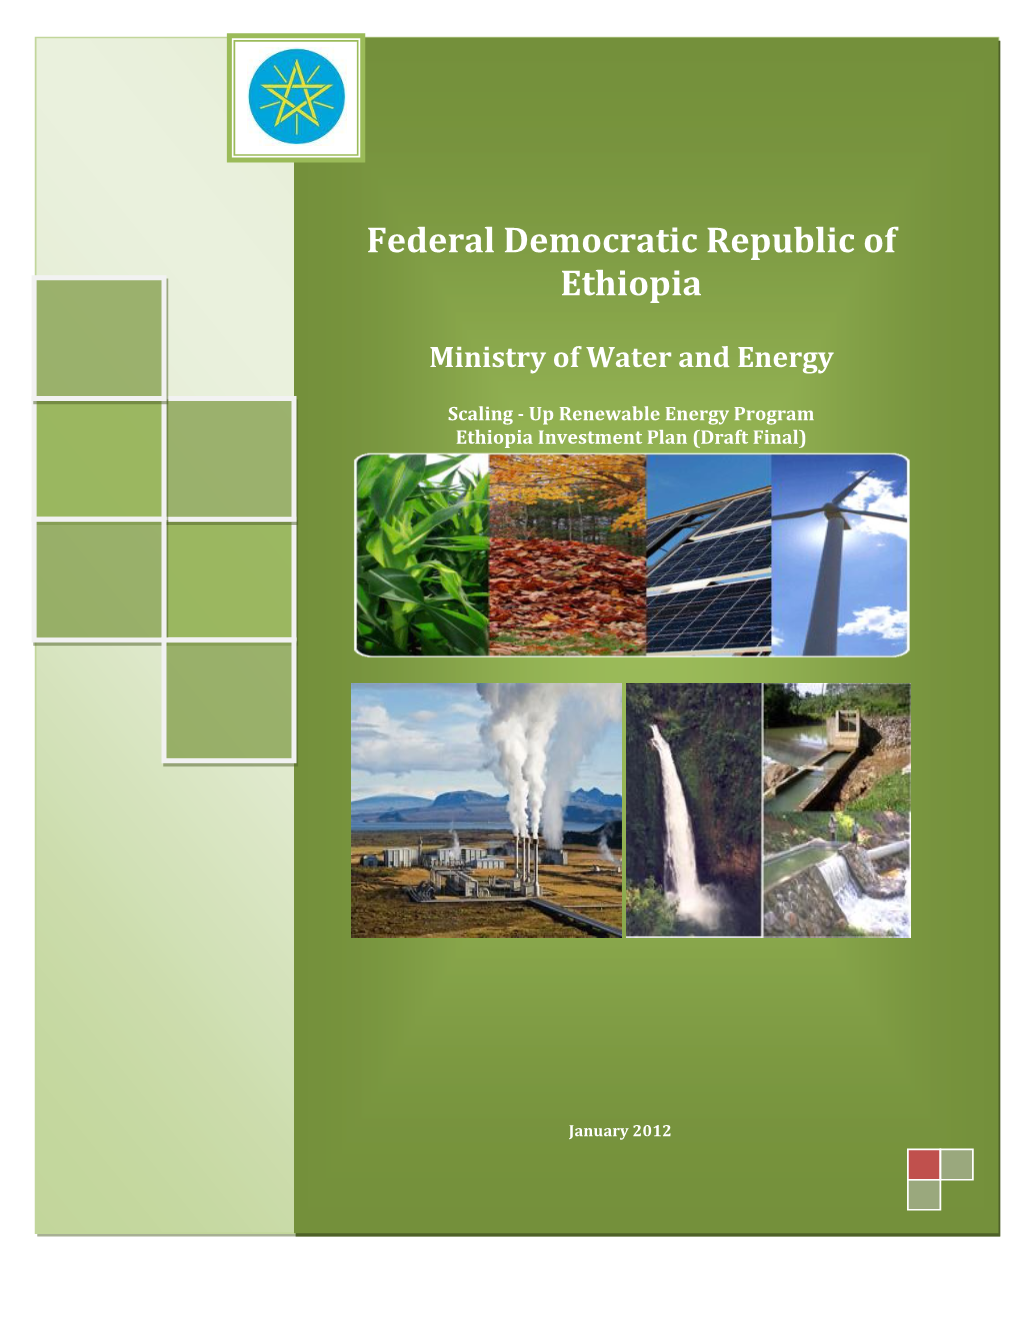 Federal Democratic Republic of Ethiopia, Ministry of Water